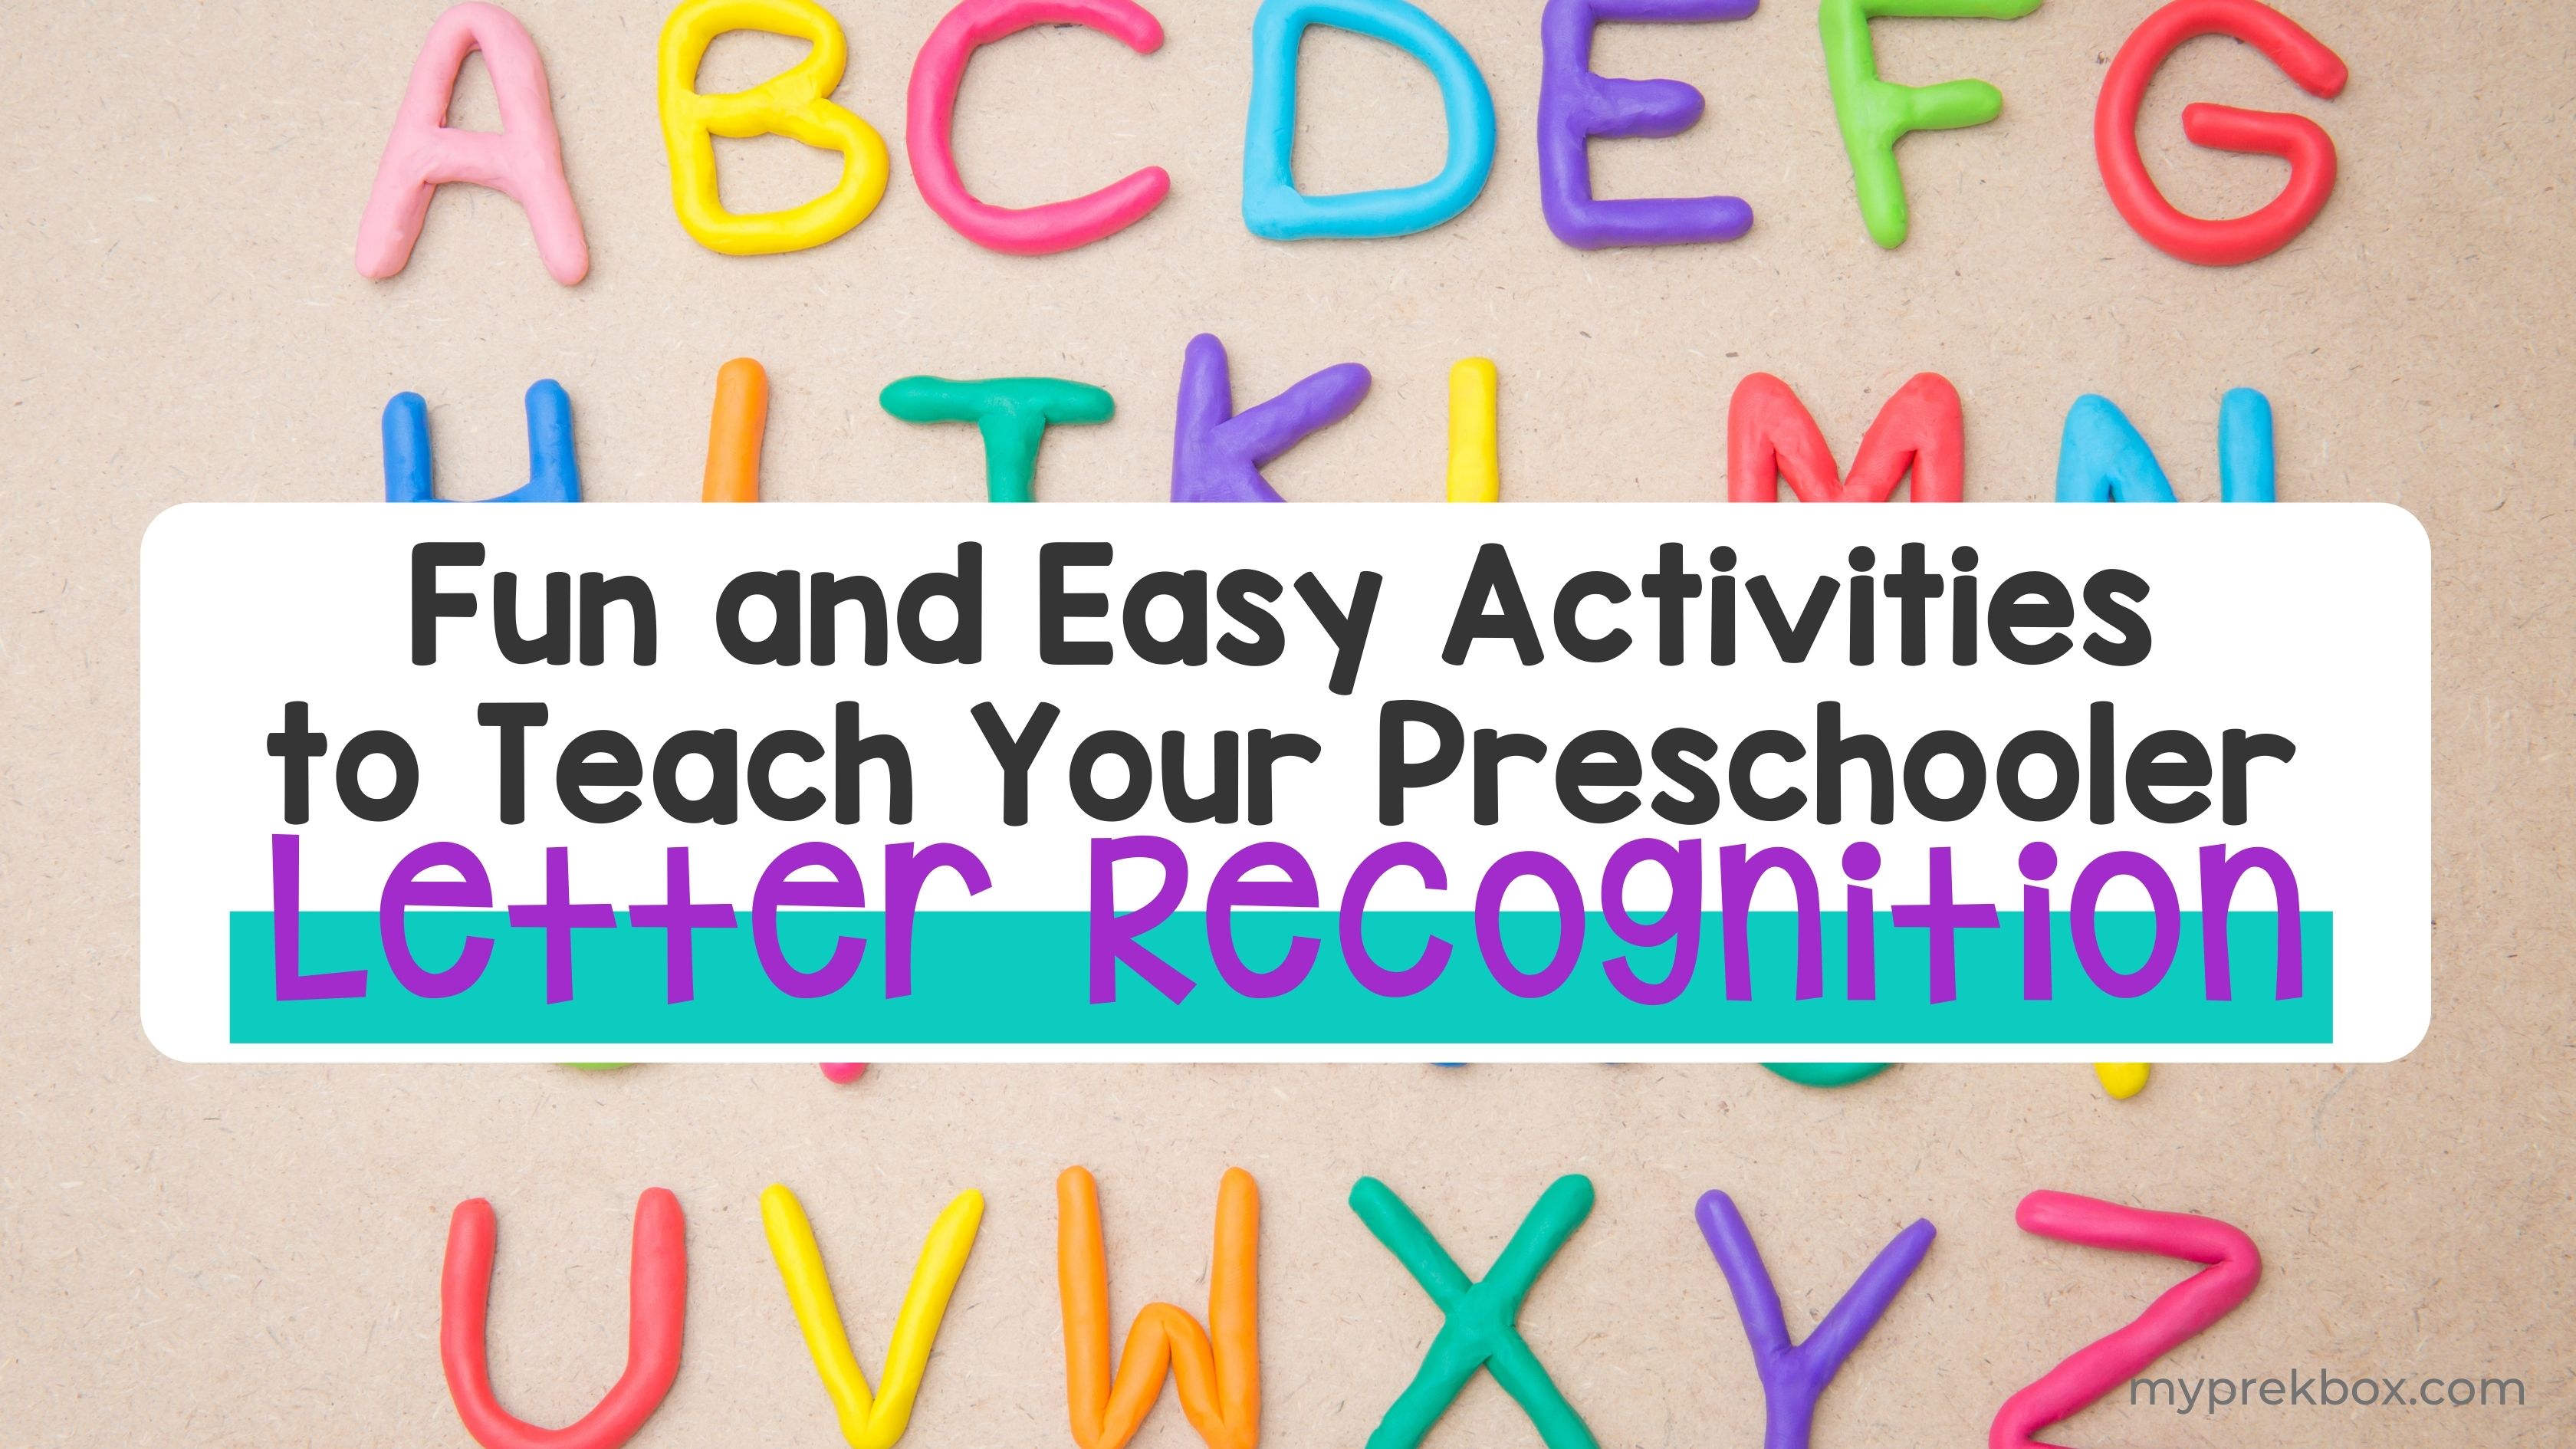 7 Fun and Easy Activities to Teach Your Preschooler Letter Recognition